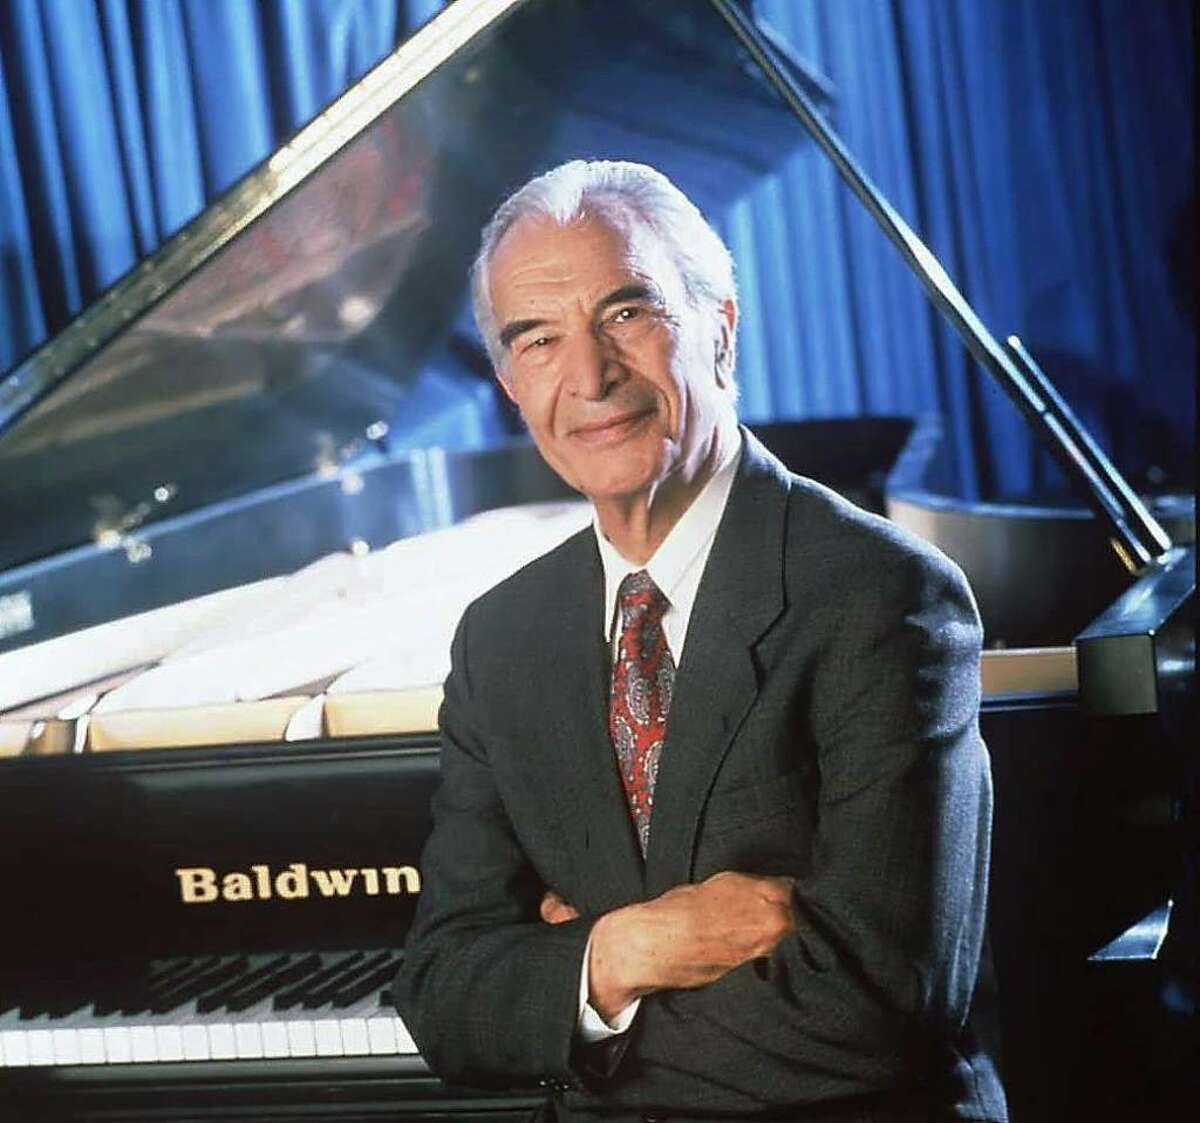 Dave Brubeck posed by a piano. Brubeck, a pianist, was a 2009 Kennedy Center Honoree.